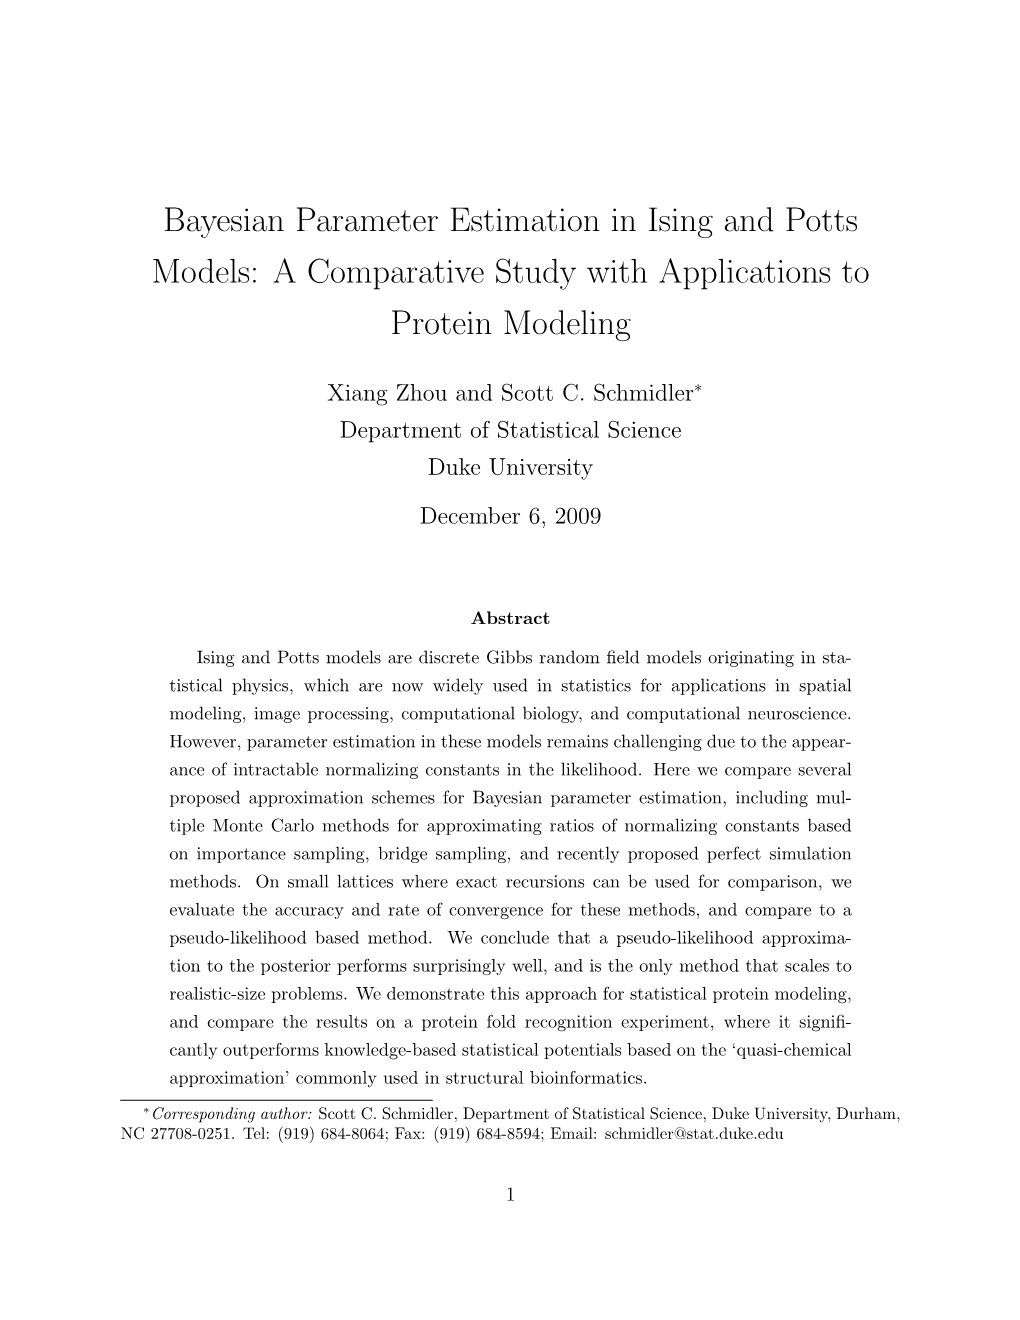 Bayesian Parameter Estimation in Ising and Potts Models: a Comparative Study with Applications to Protein Modeling